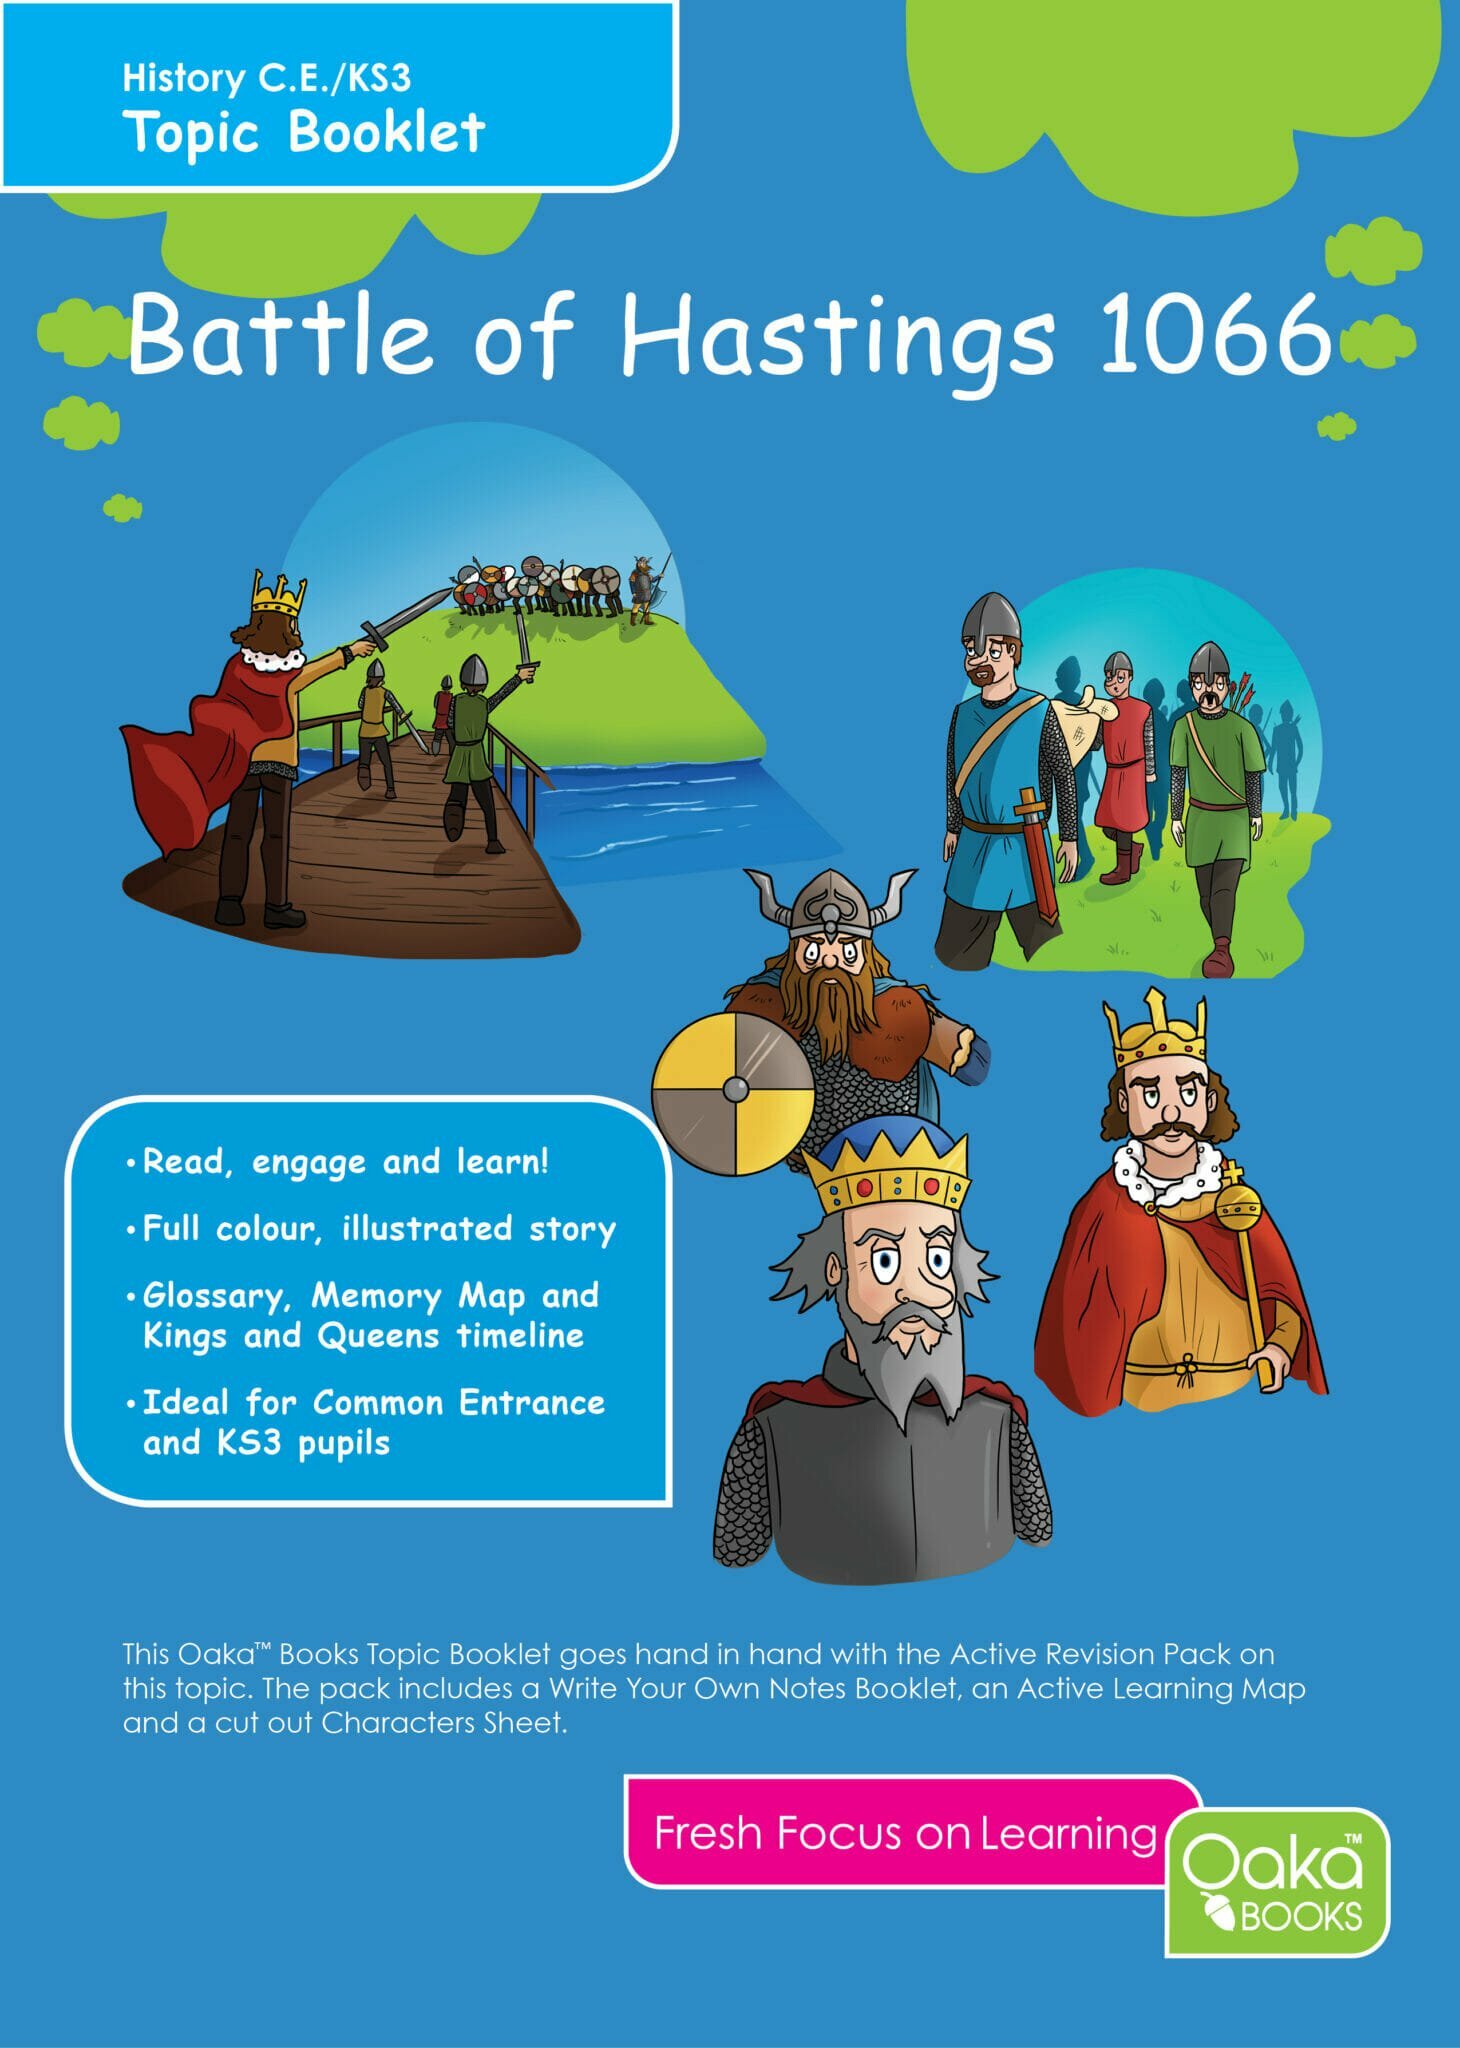 CE/KS3 History: The Battle of Hastings